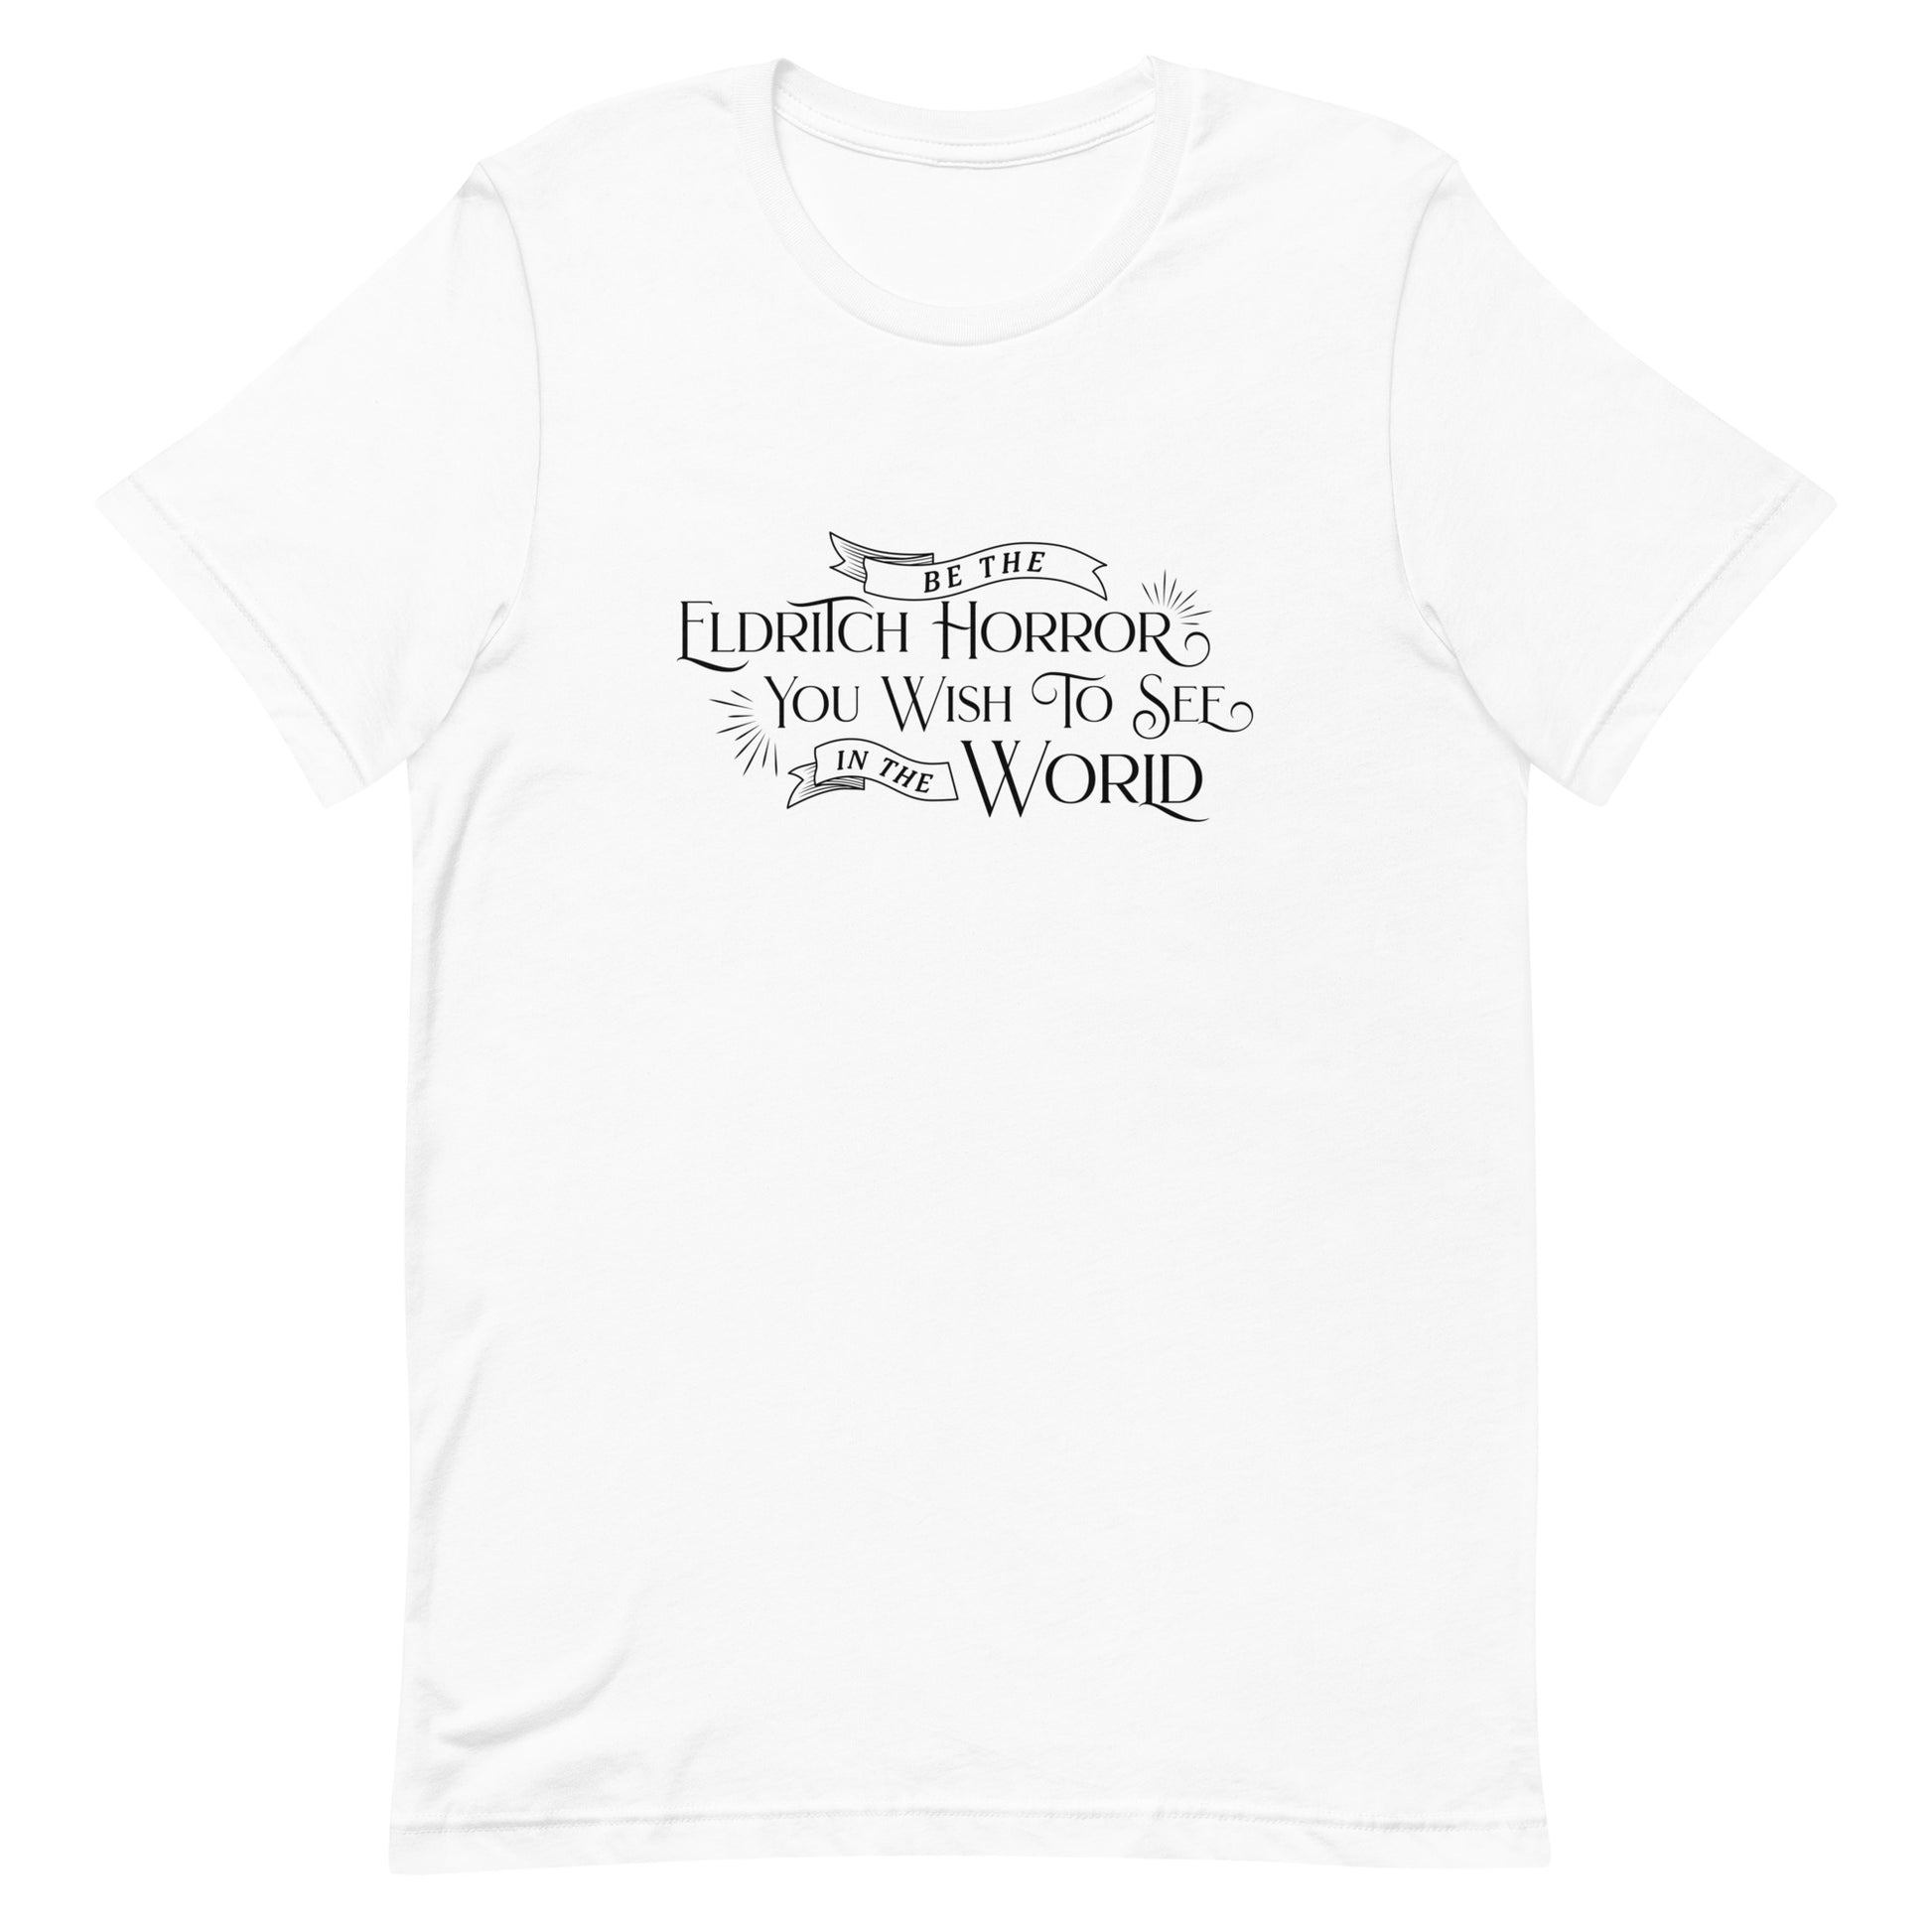 A white crewneck t-shirt with white text in an old-fashioned style that reads "Be The Eldritch Horror You Wish To See In The World"